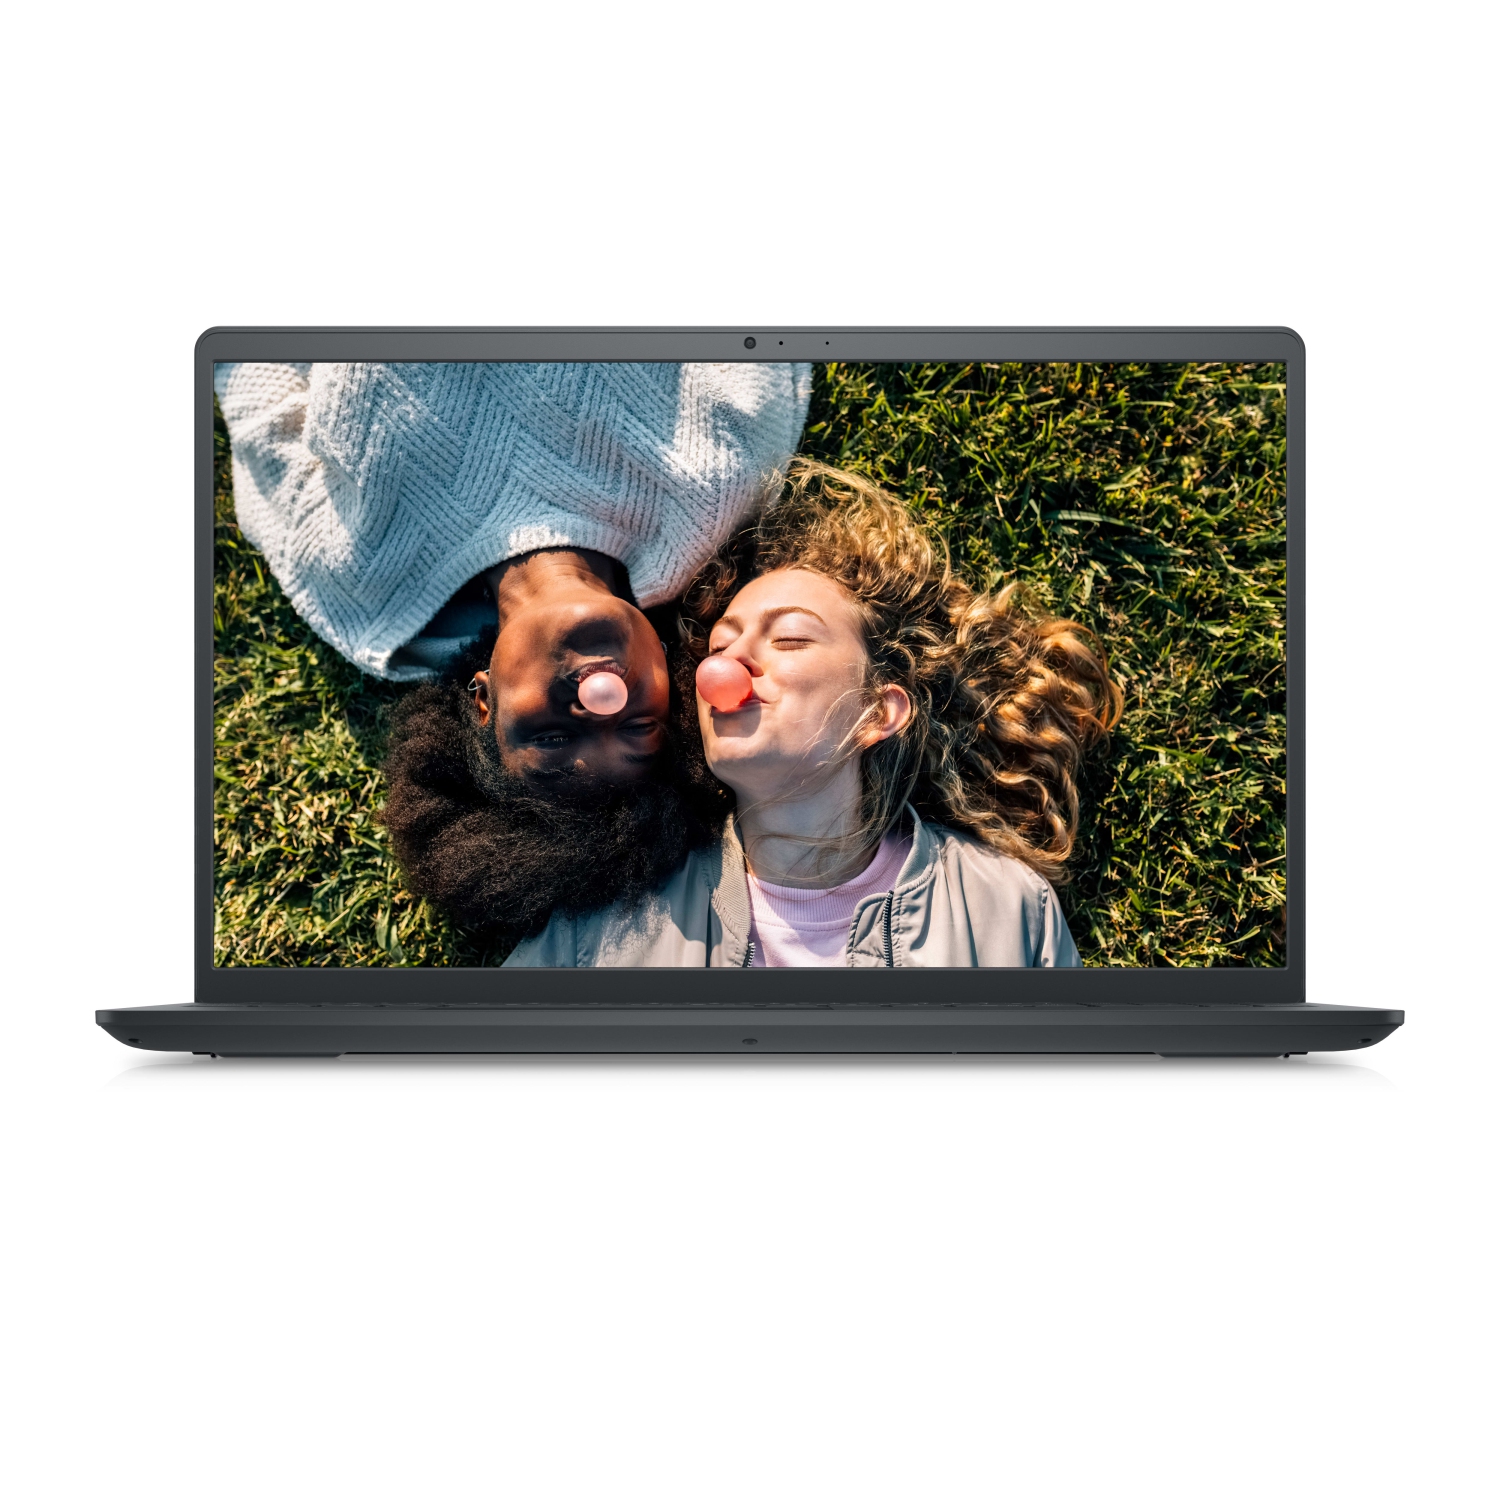 Refurbished (Excellent) – Dell Inspiron 3511 Laptop (2021) | 15.6" FHD Touch | Core i5 - 4TB SSD - 64GB RAM | 4 Cores @ 4.2 GHz - 11th Gen CPU